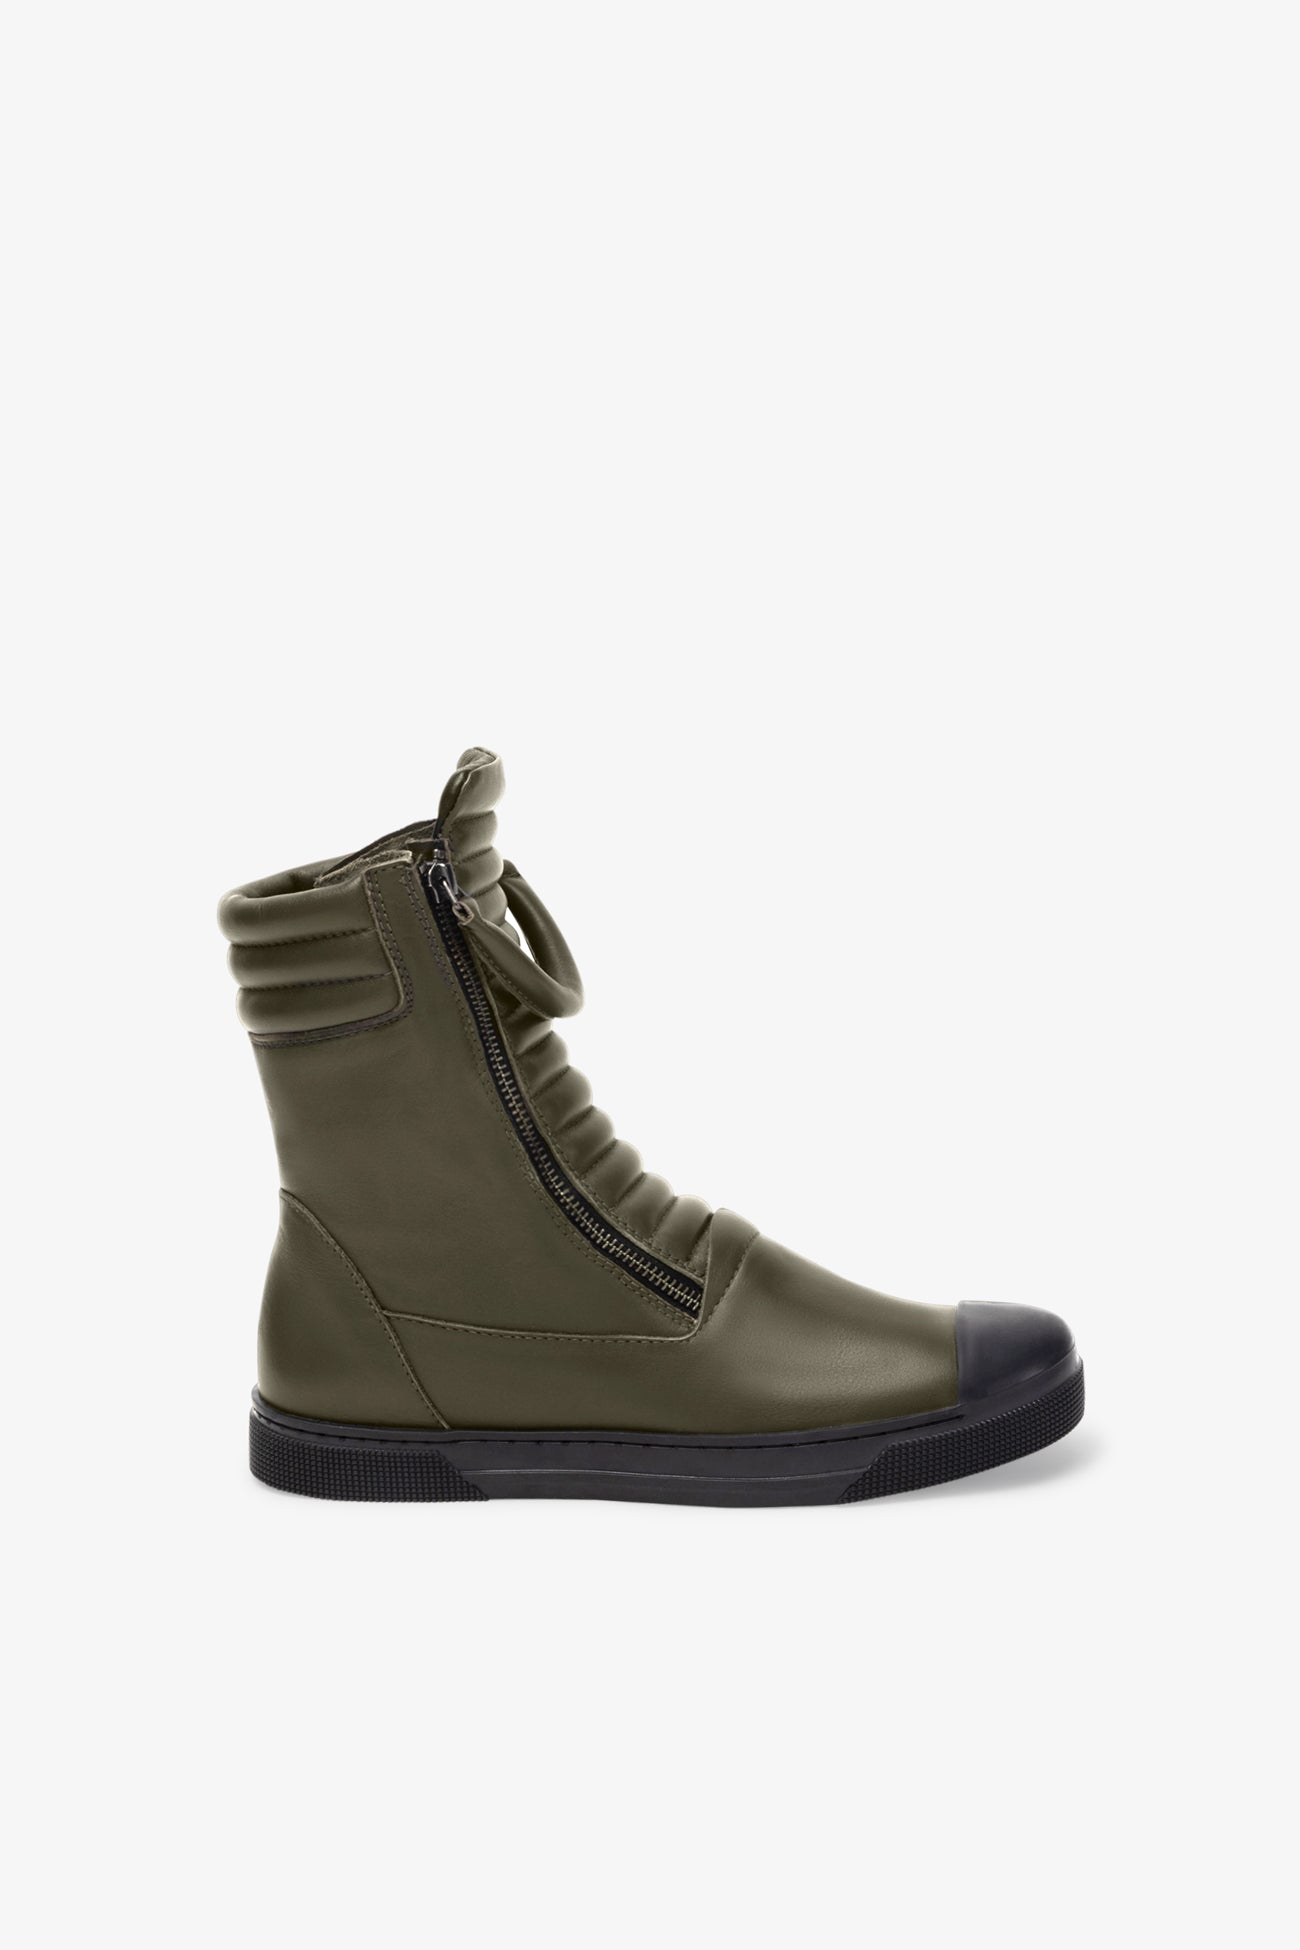 Olive Green Leather Shoes - Karma Boots | Marcella